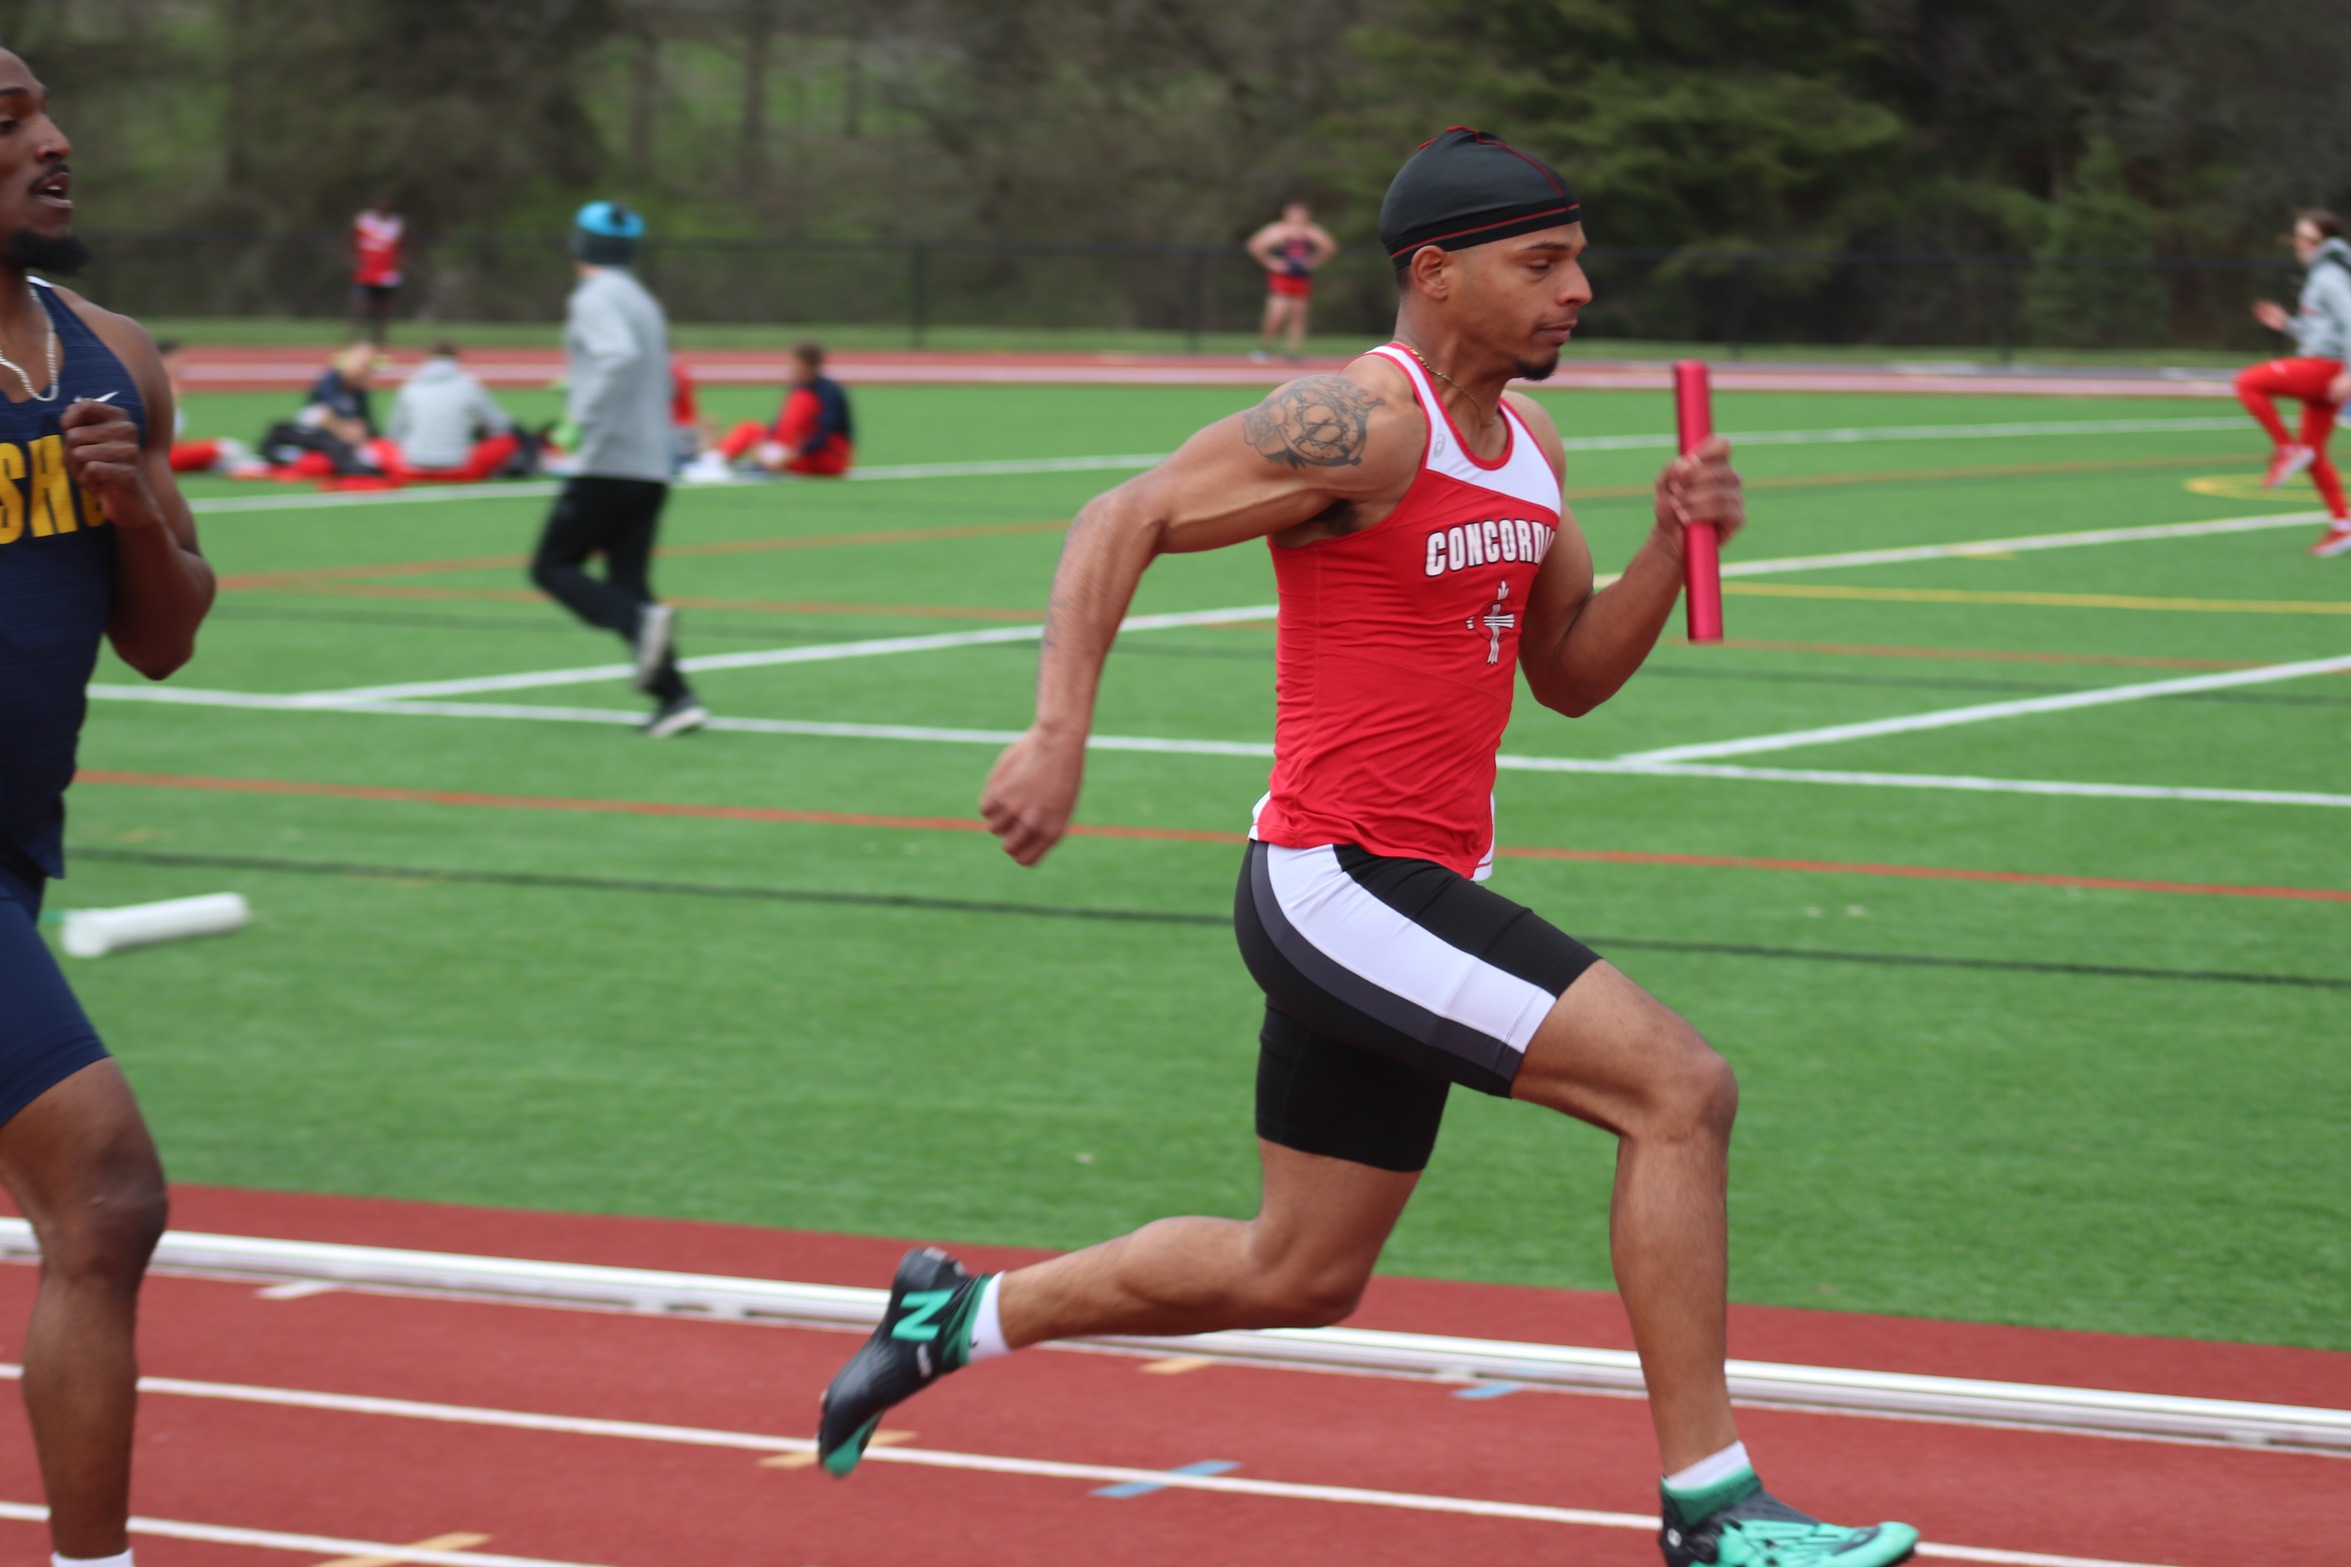 NCCAA Preview: Men's Track prepared for NCCAA Championships later this Week